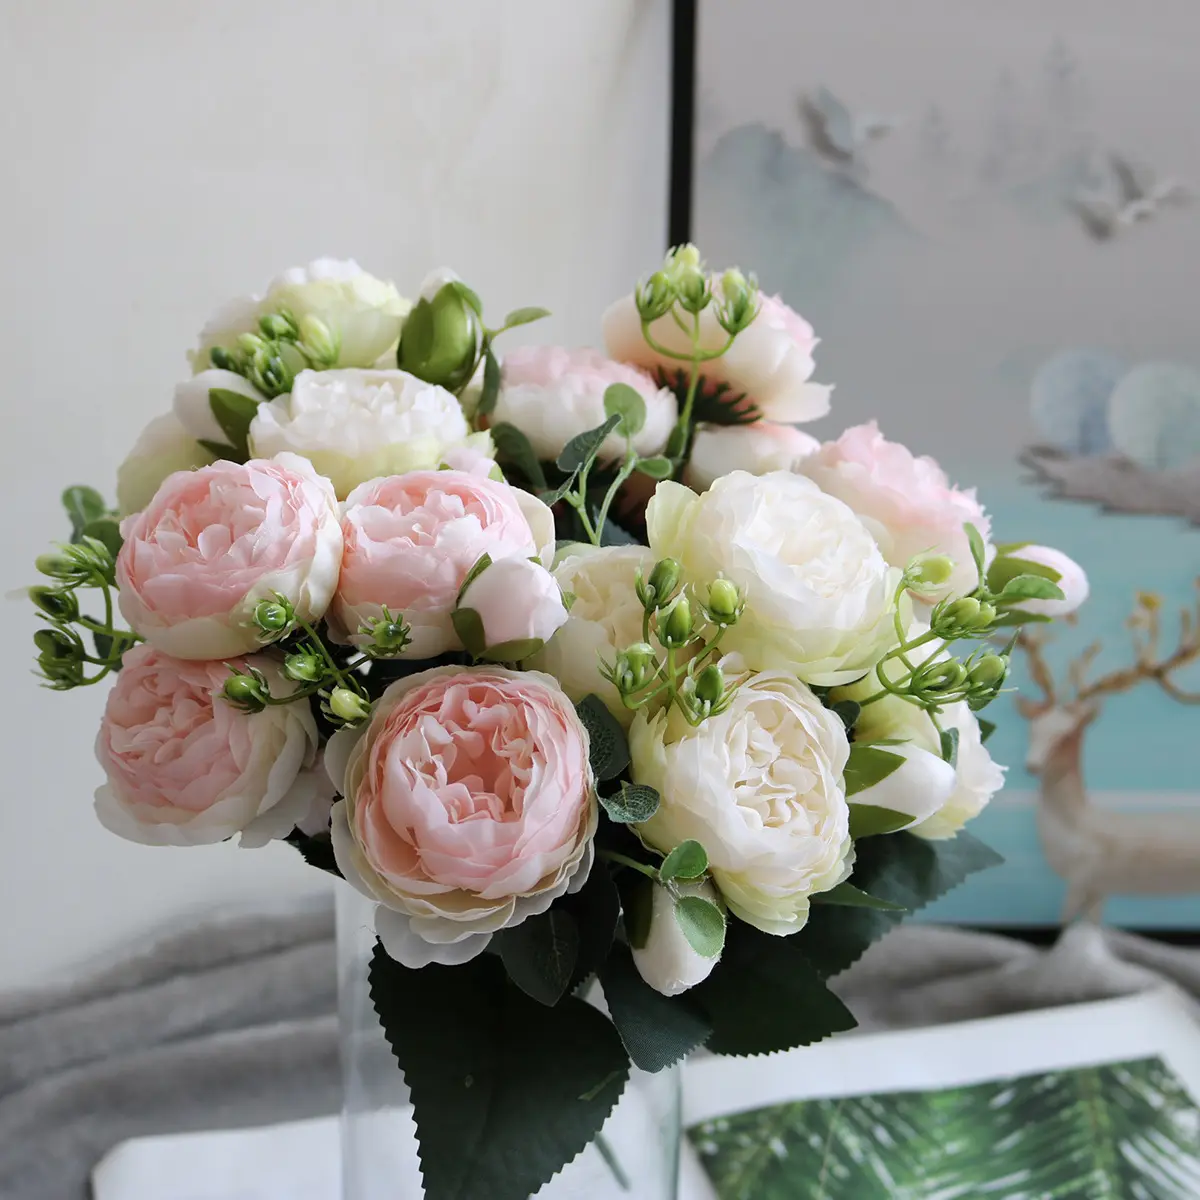 Wholesale Fabric Dried Flower 5 Heads Rose Artificial Flowers for Wedding Decoration